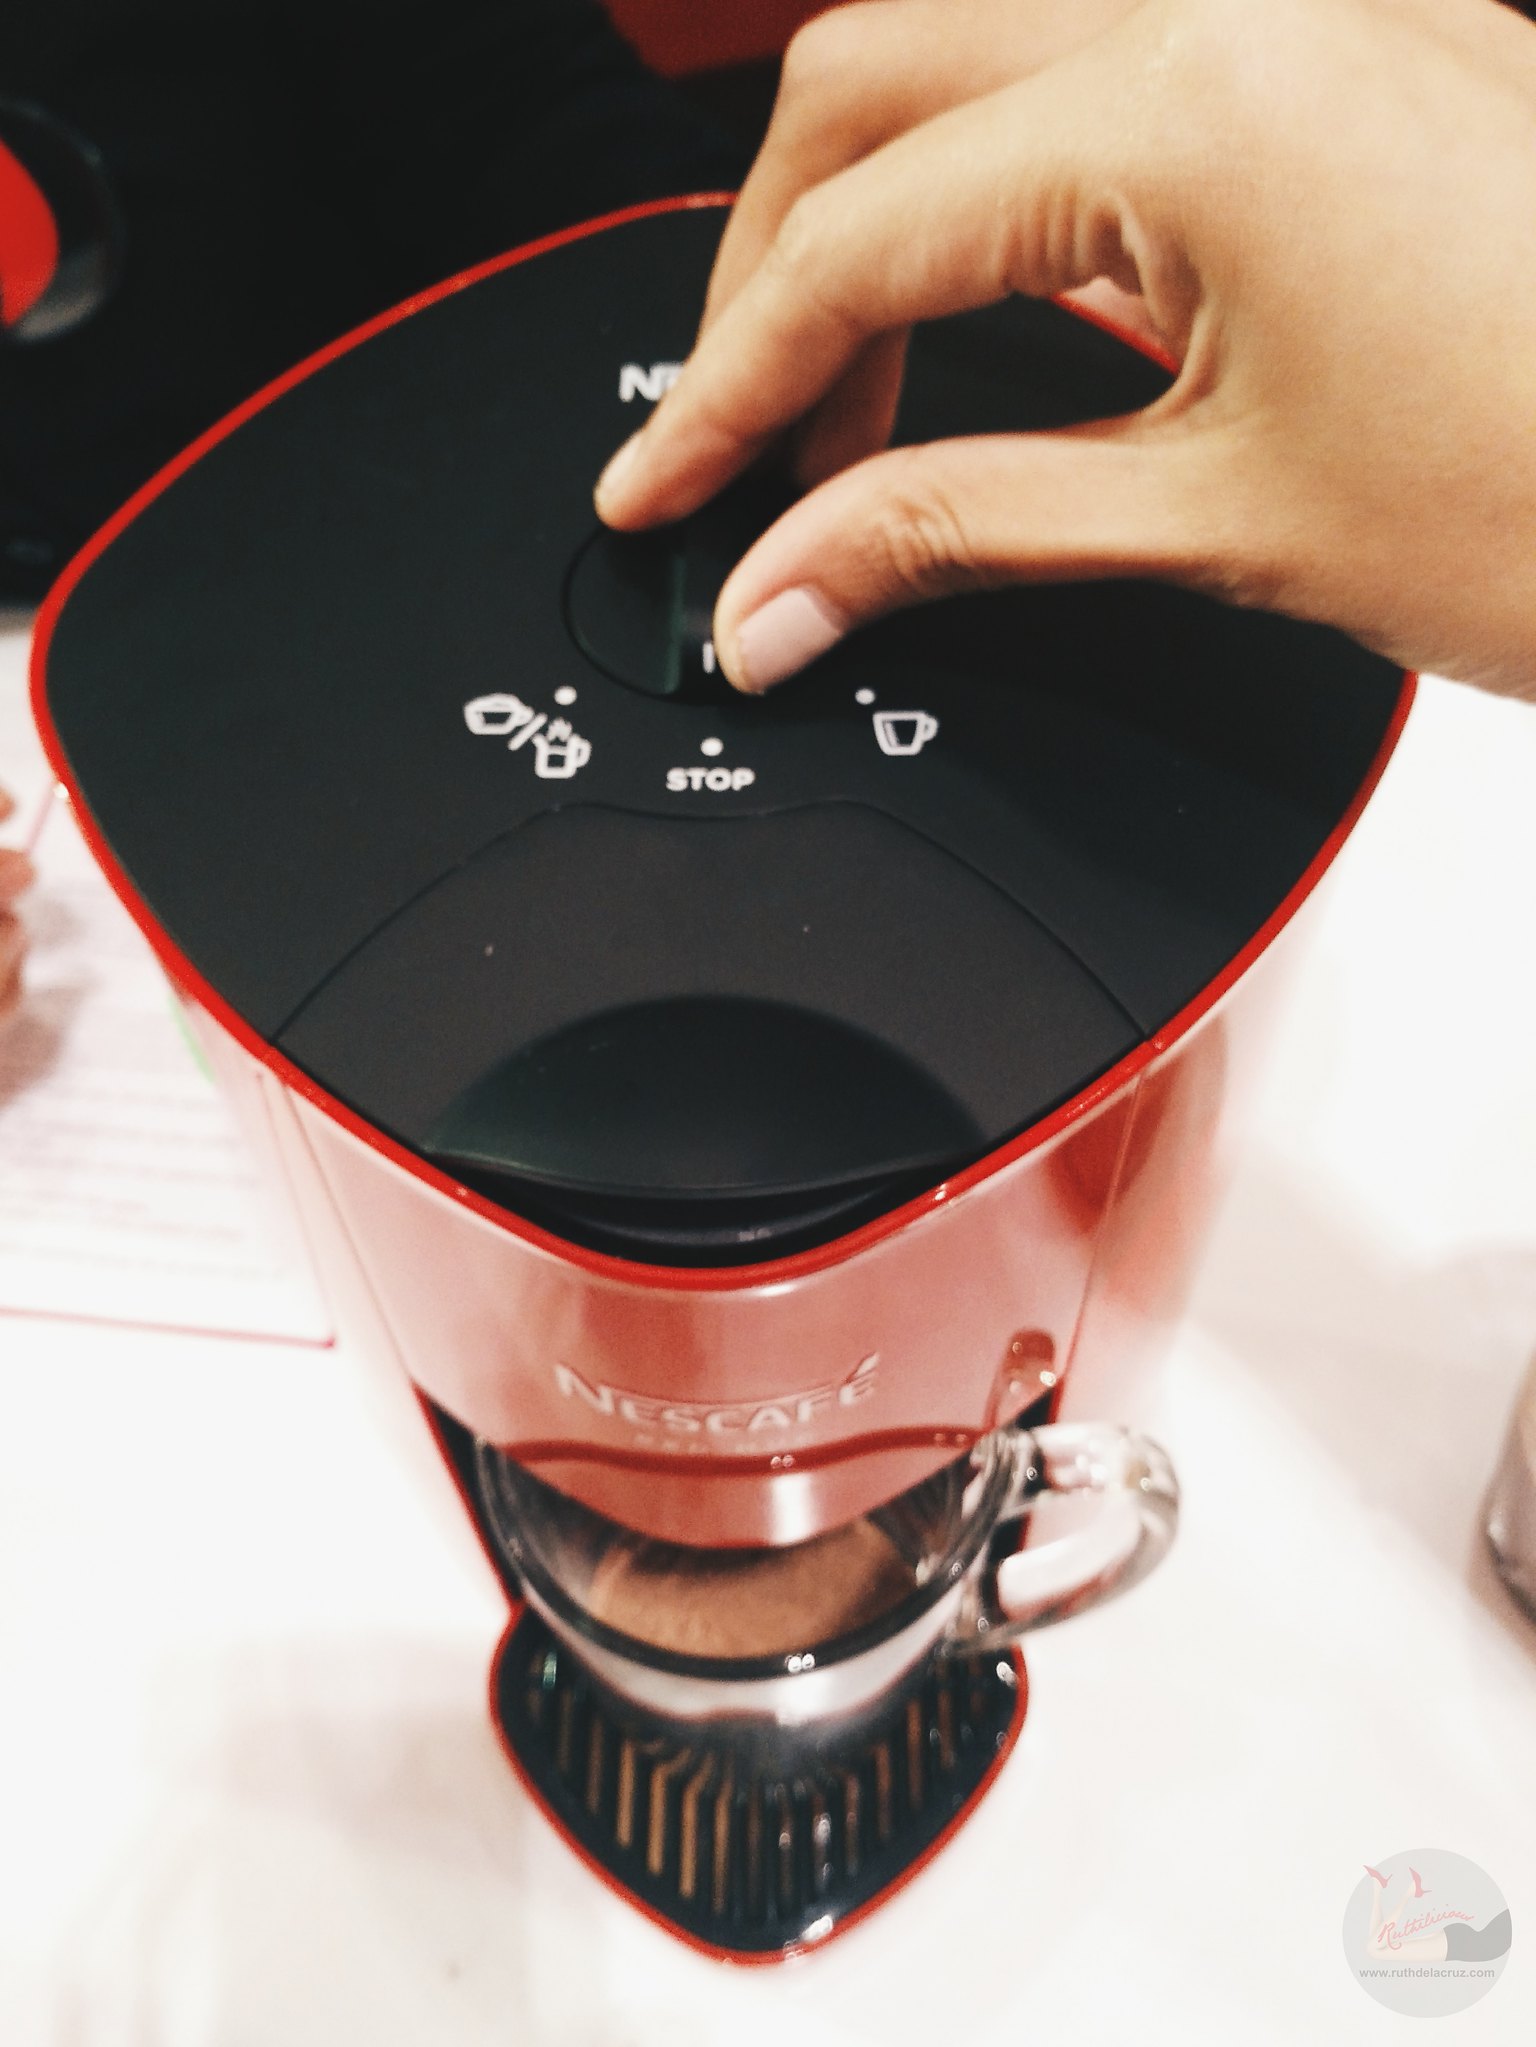 Nescafe's Red Mug Coffee Machine could be the worst gift idea money can buy  - NZ Herald